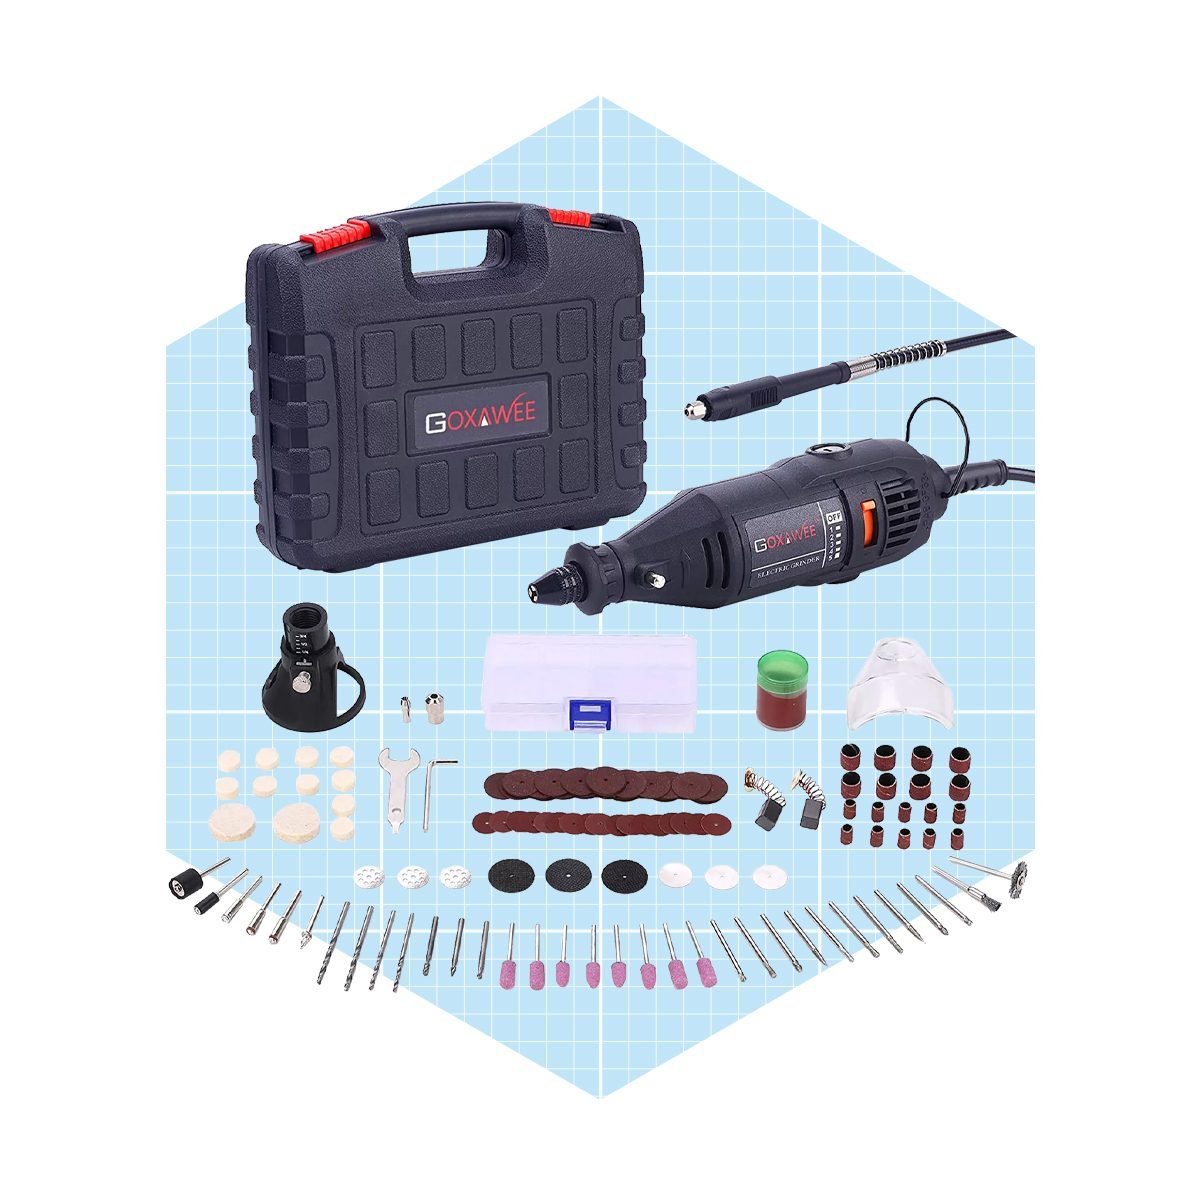 Goxawee Power Rotary Tool Kit With Multipro Keyless Chuck And 140pcs Accessories Ecomm Walmart.com